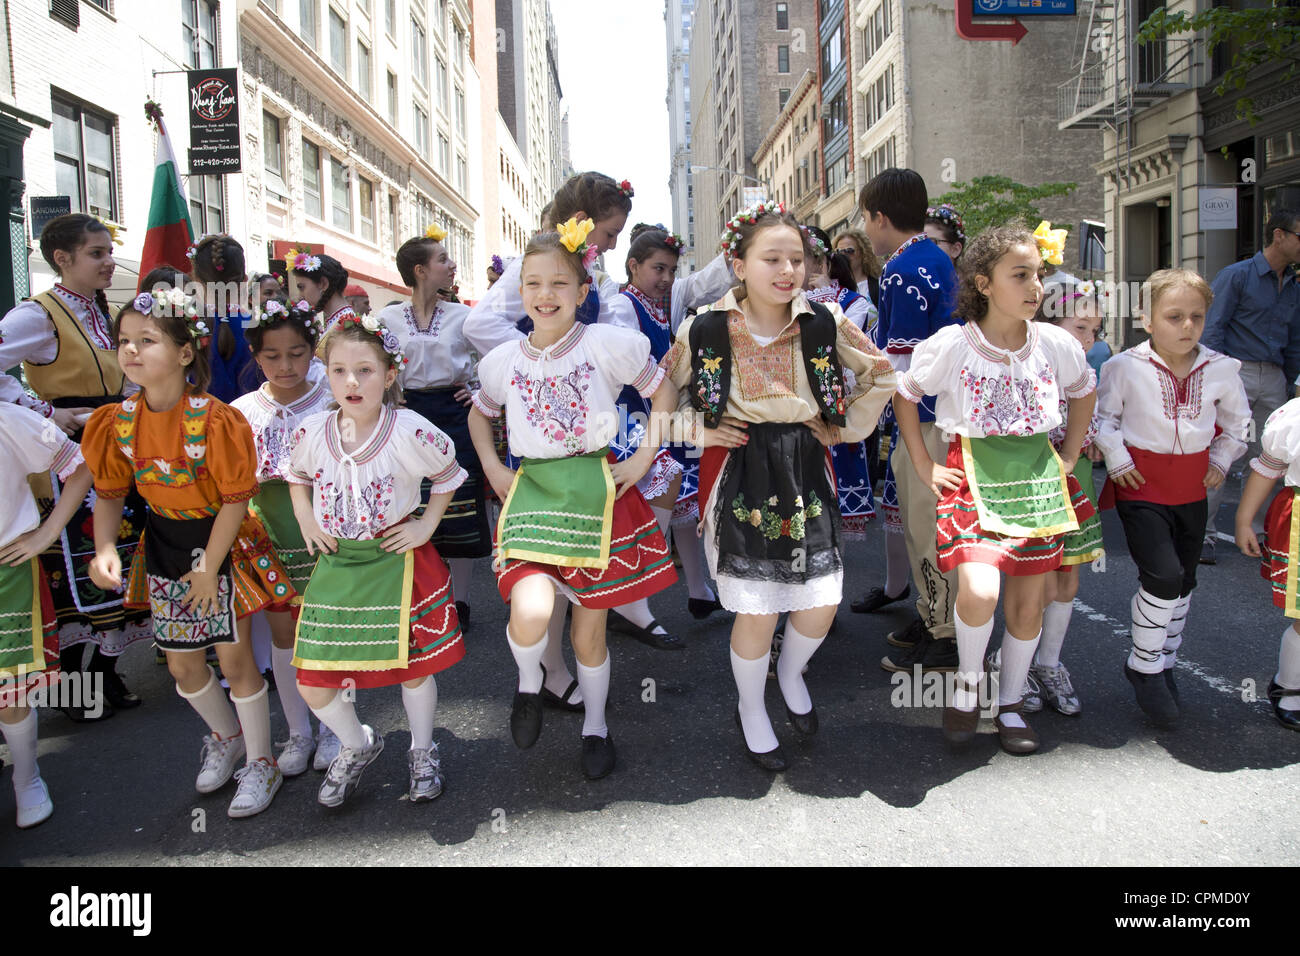 Annual Dance Parade in NYC along Broadway. Child Bulgarian Dance group. Stock Photo